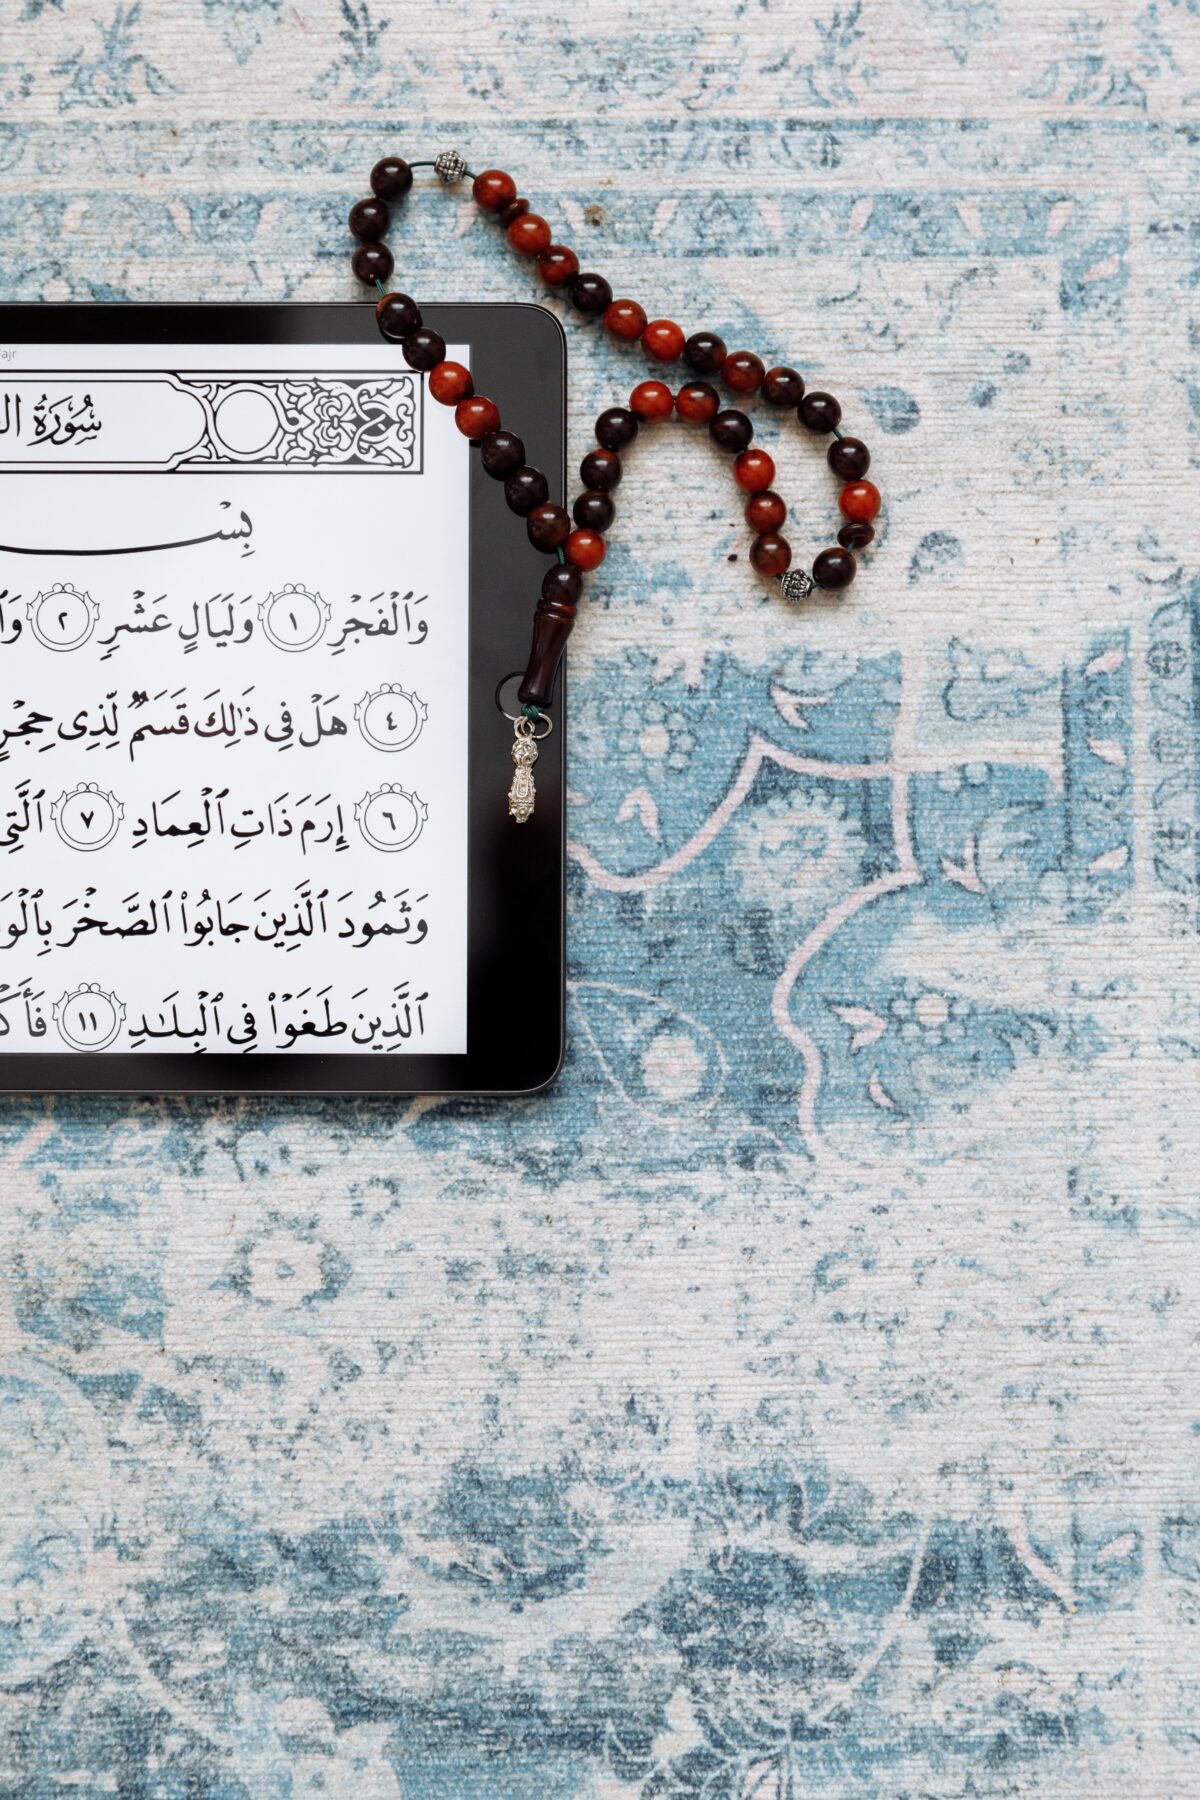 Why Shia Online Quran Academy is the best place to learn Quran online